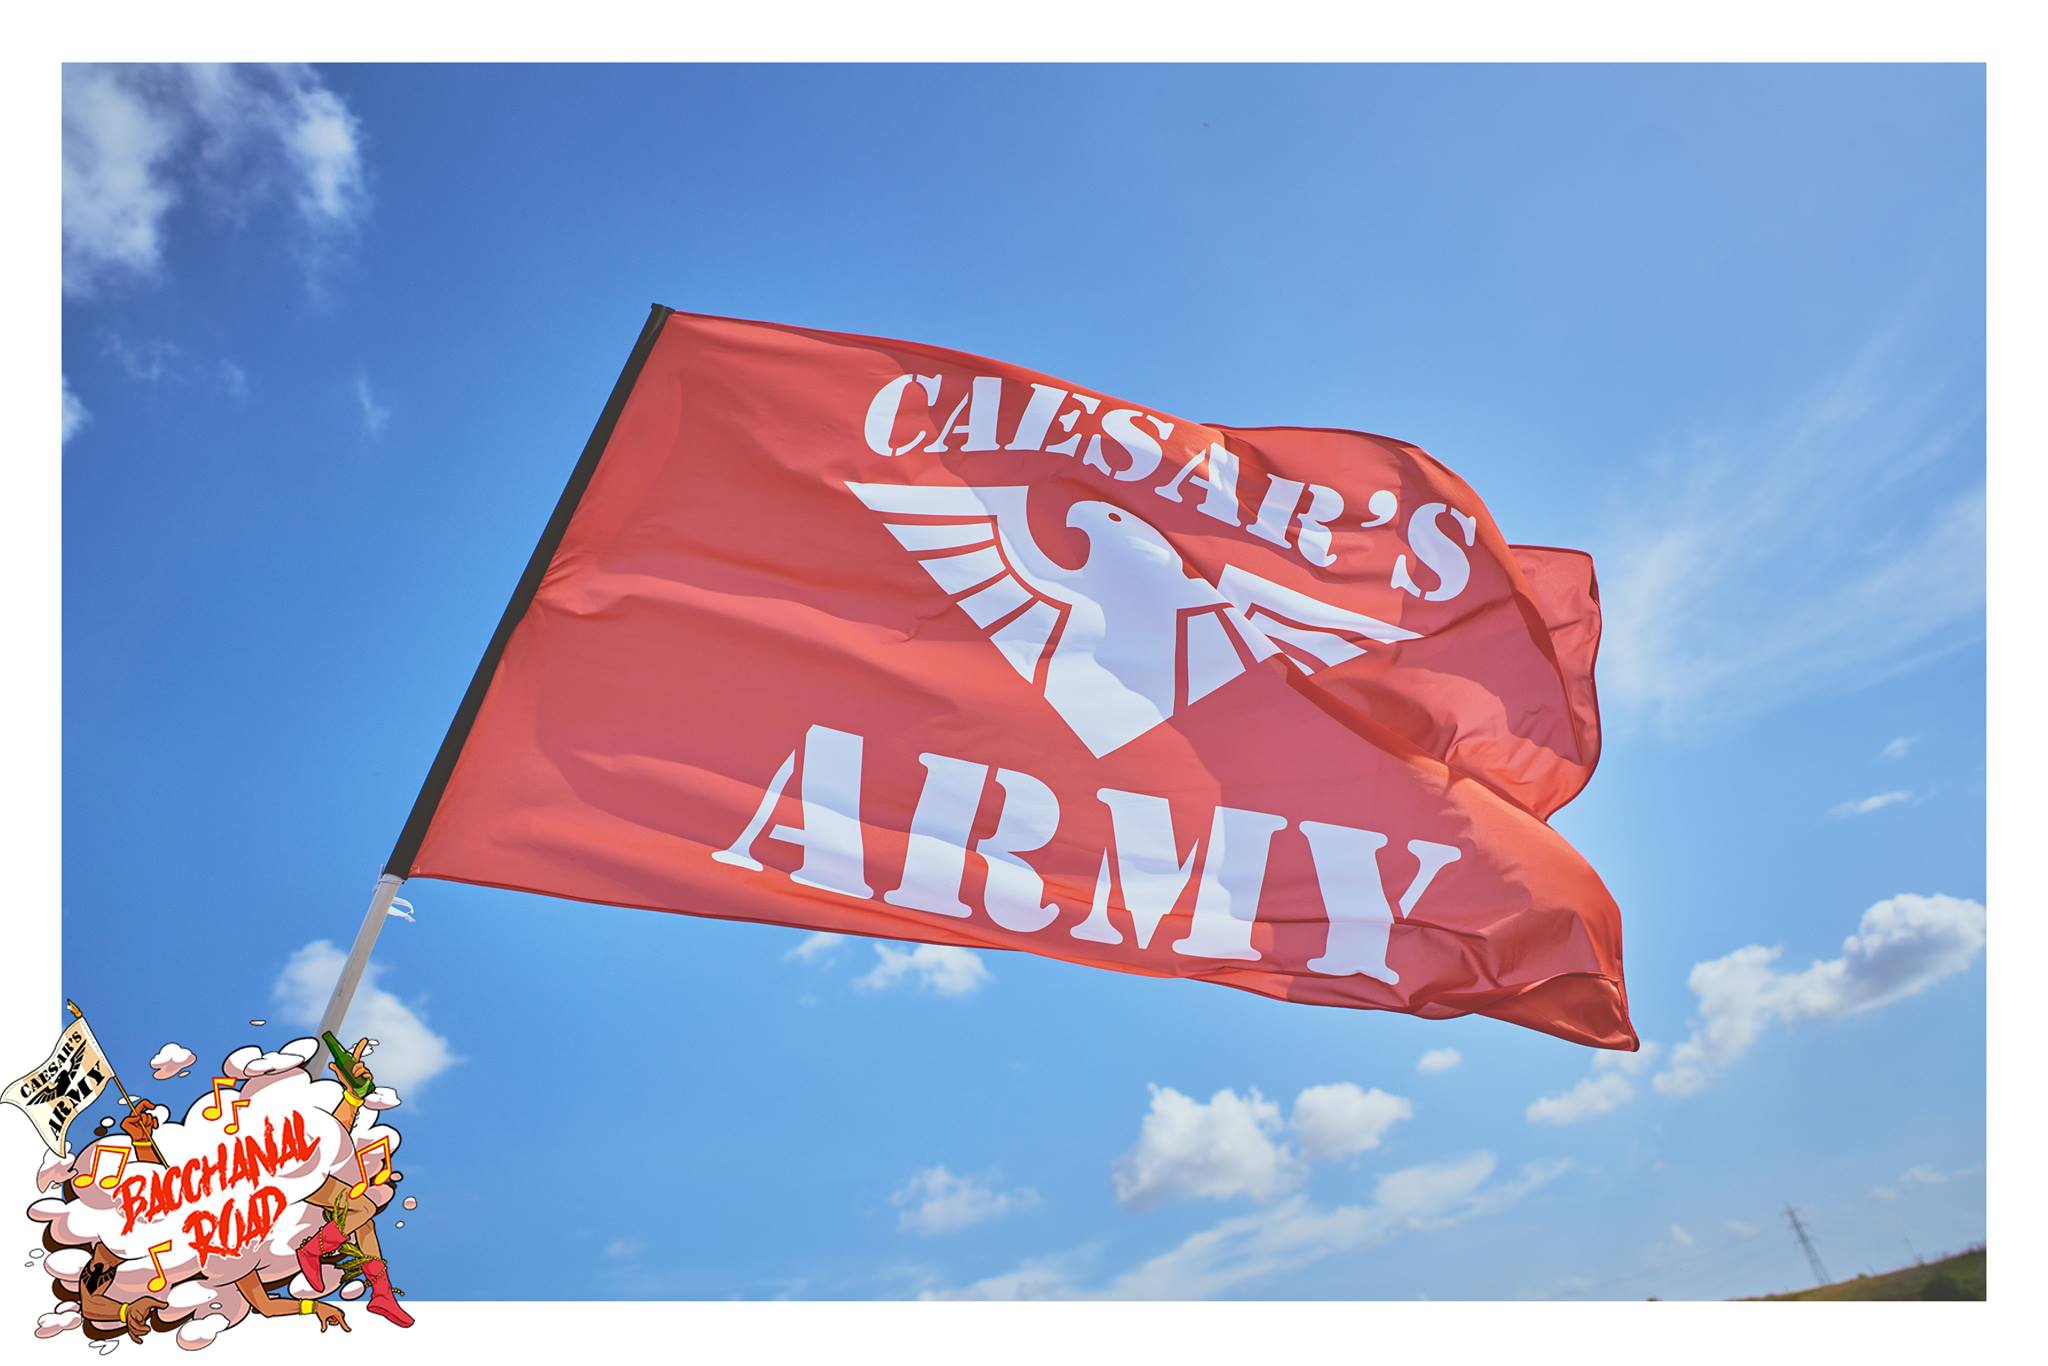 Caesar's Army - Our Services